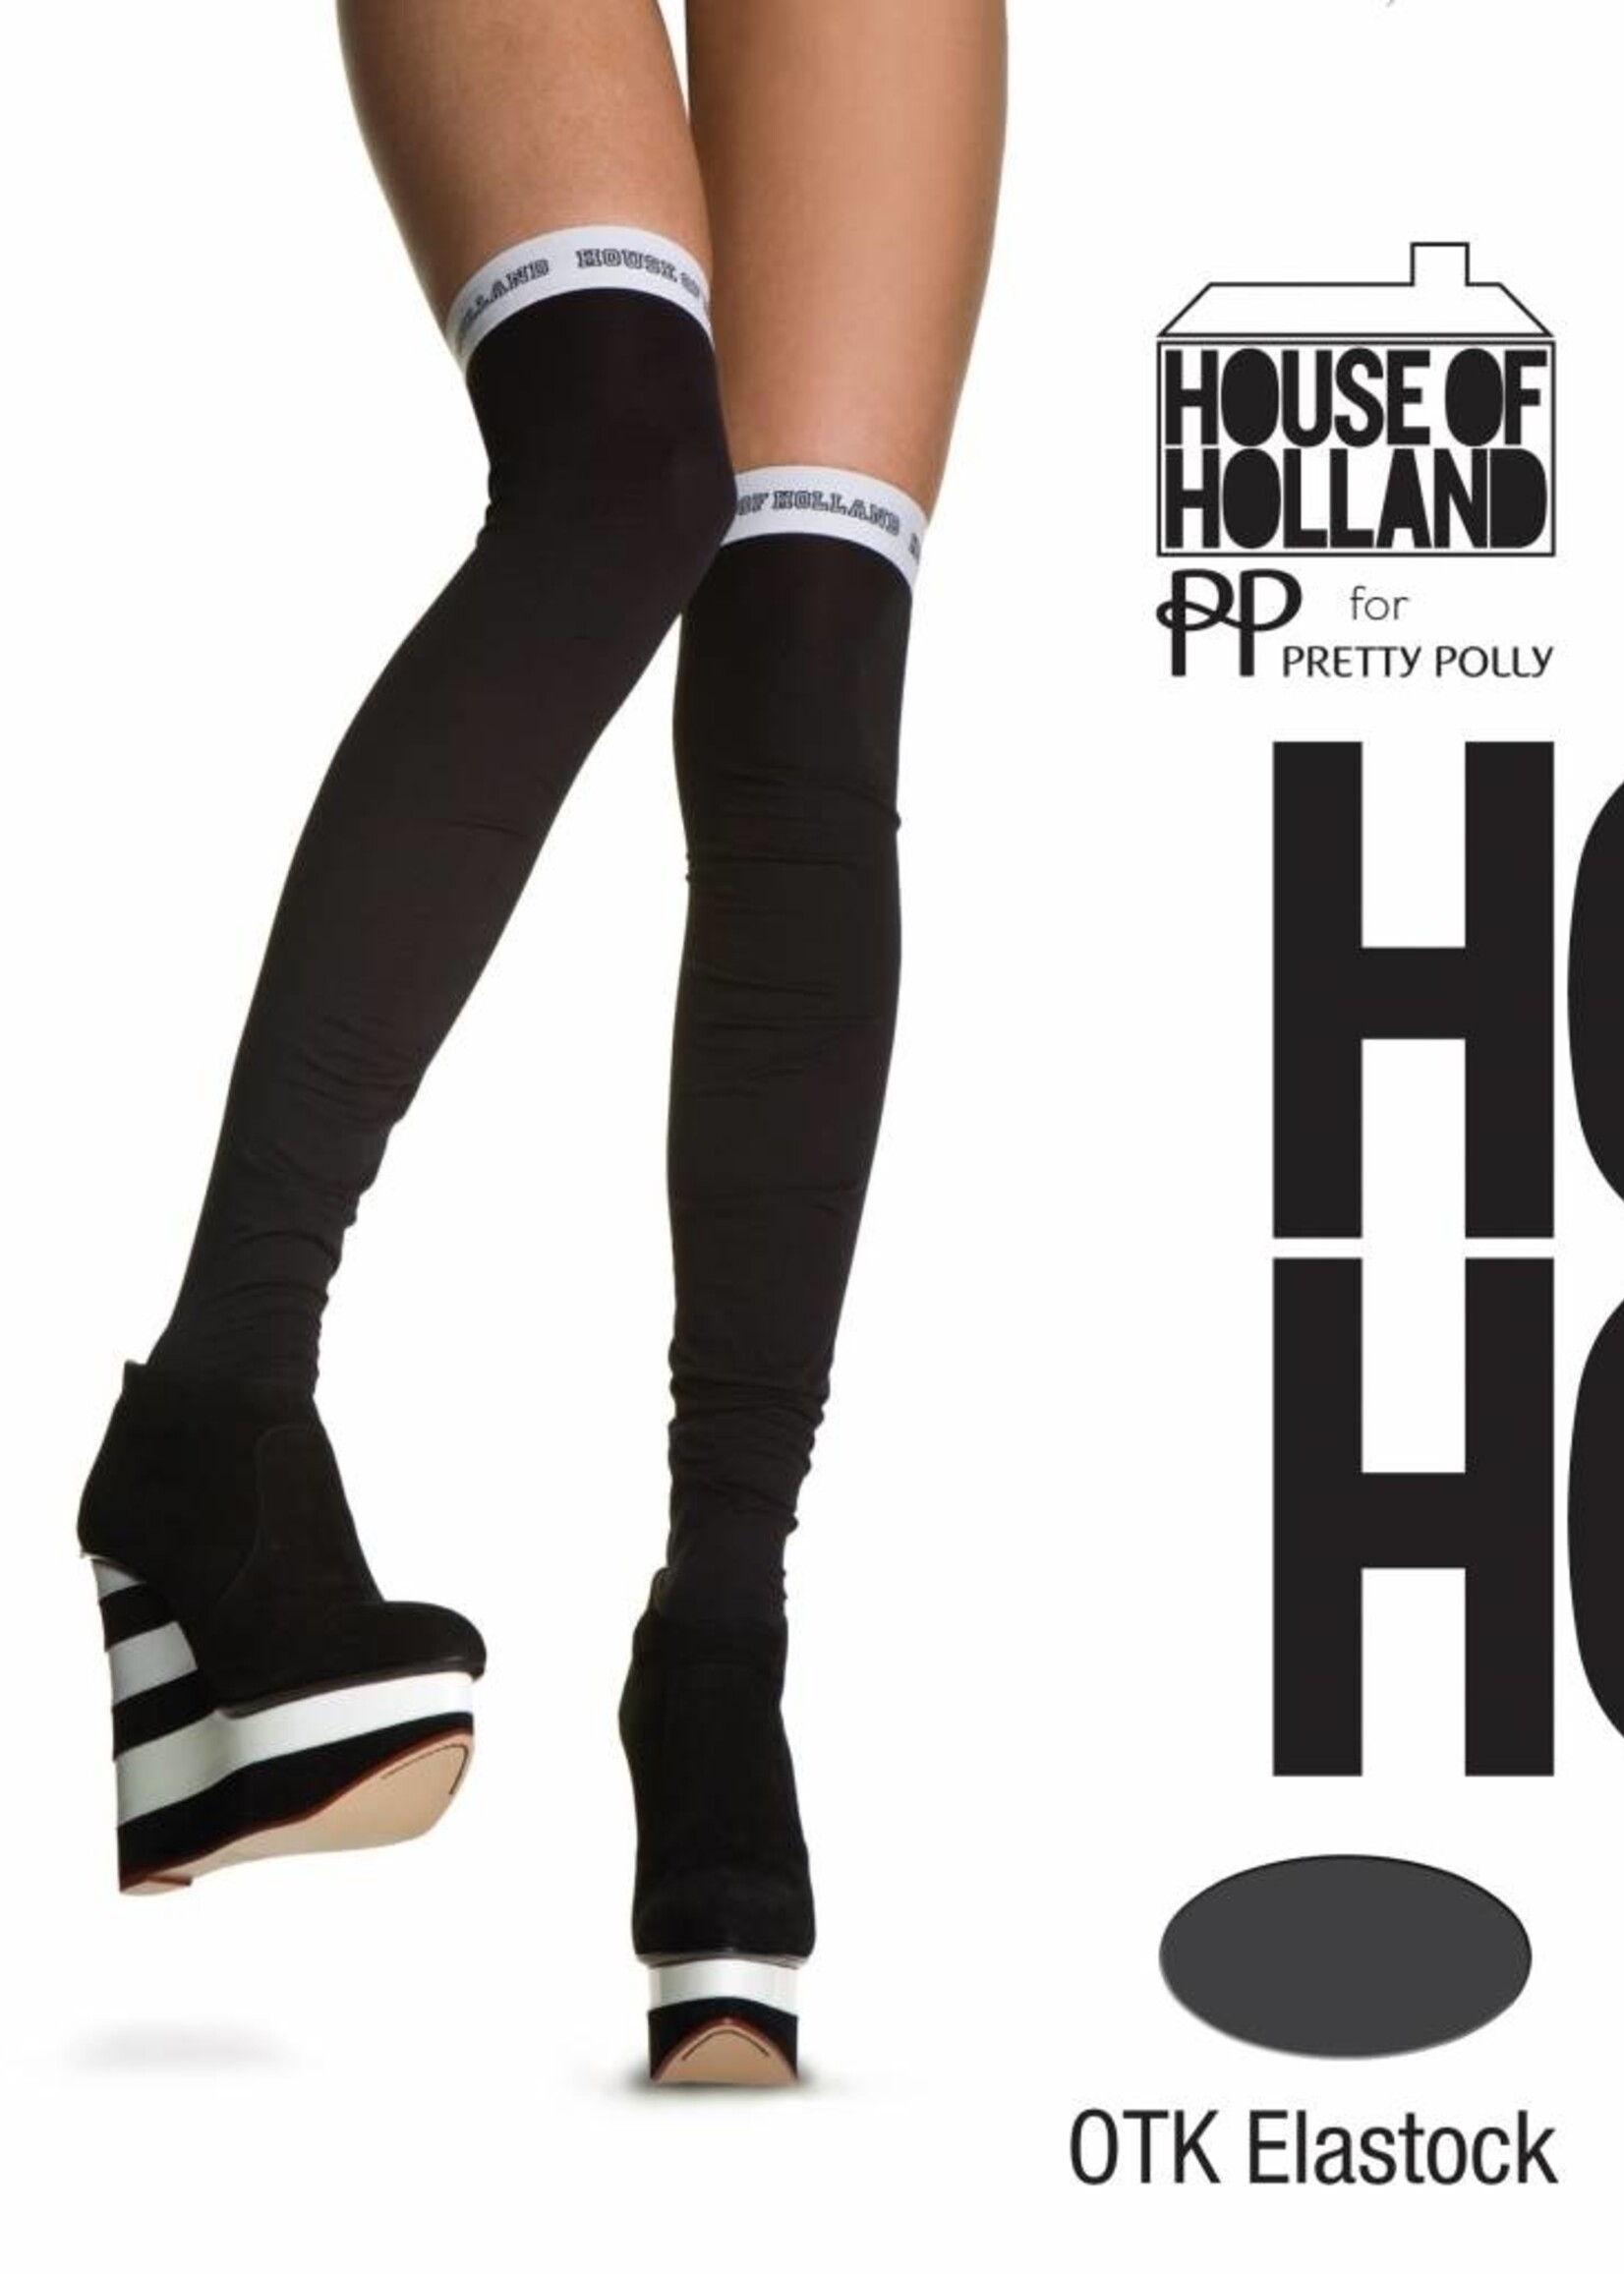 House of Holland  House of Holland Over The Knee Elastock